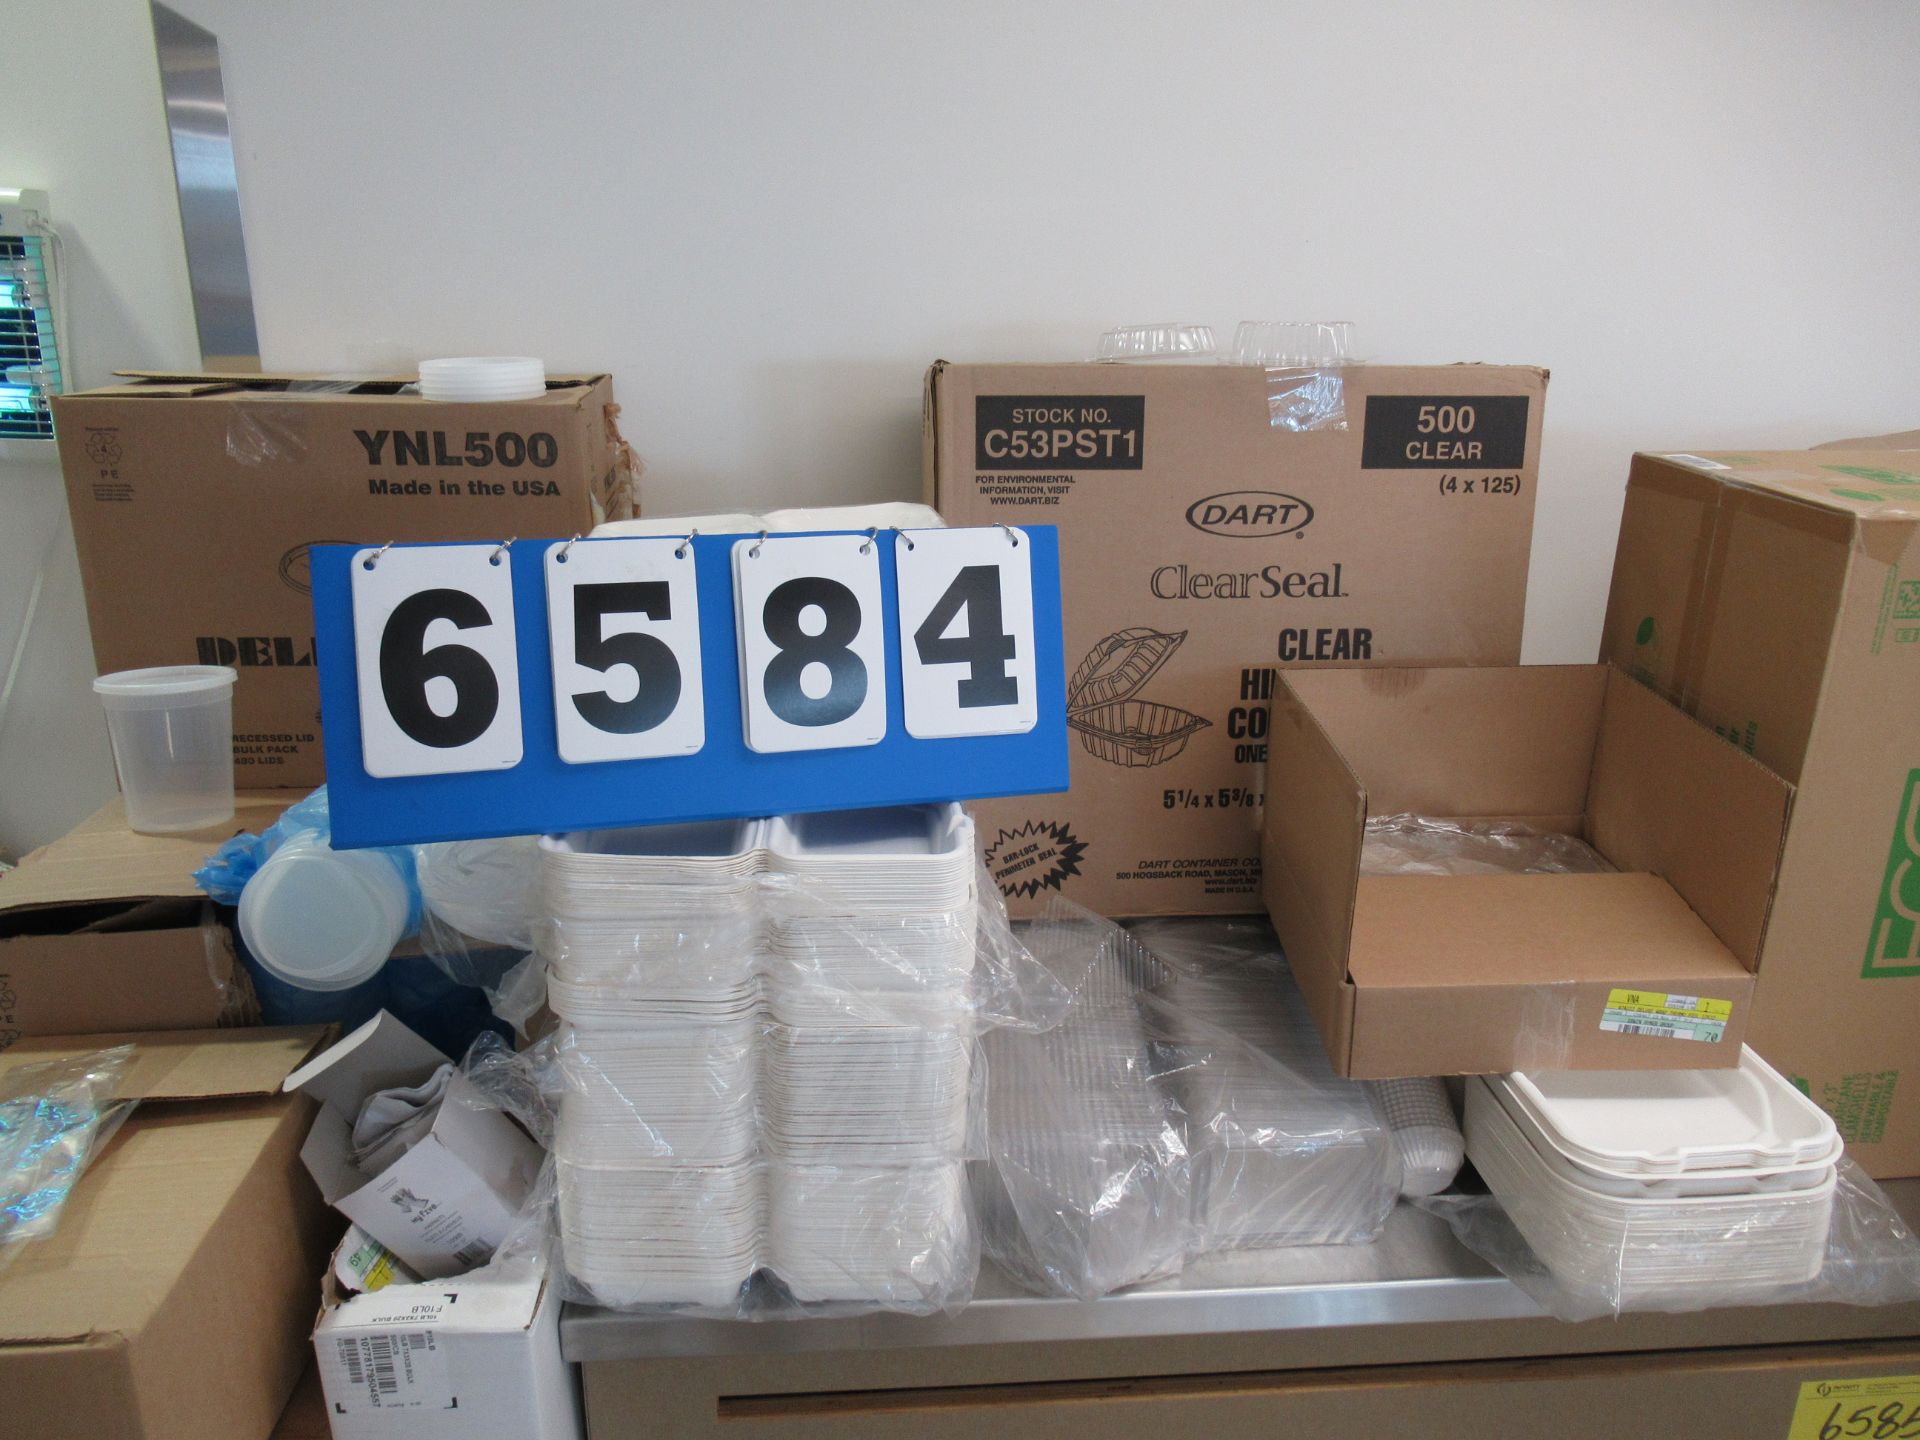 LOT OF ASSORTED TAKE OUT CONTAINERS (PIZZA BOXES, CHAFFING FUEL, GLOVES, WASTE BAGS, ETC) (REUTER) - Image 3 of 4